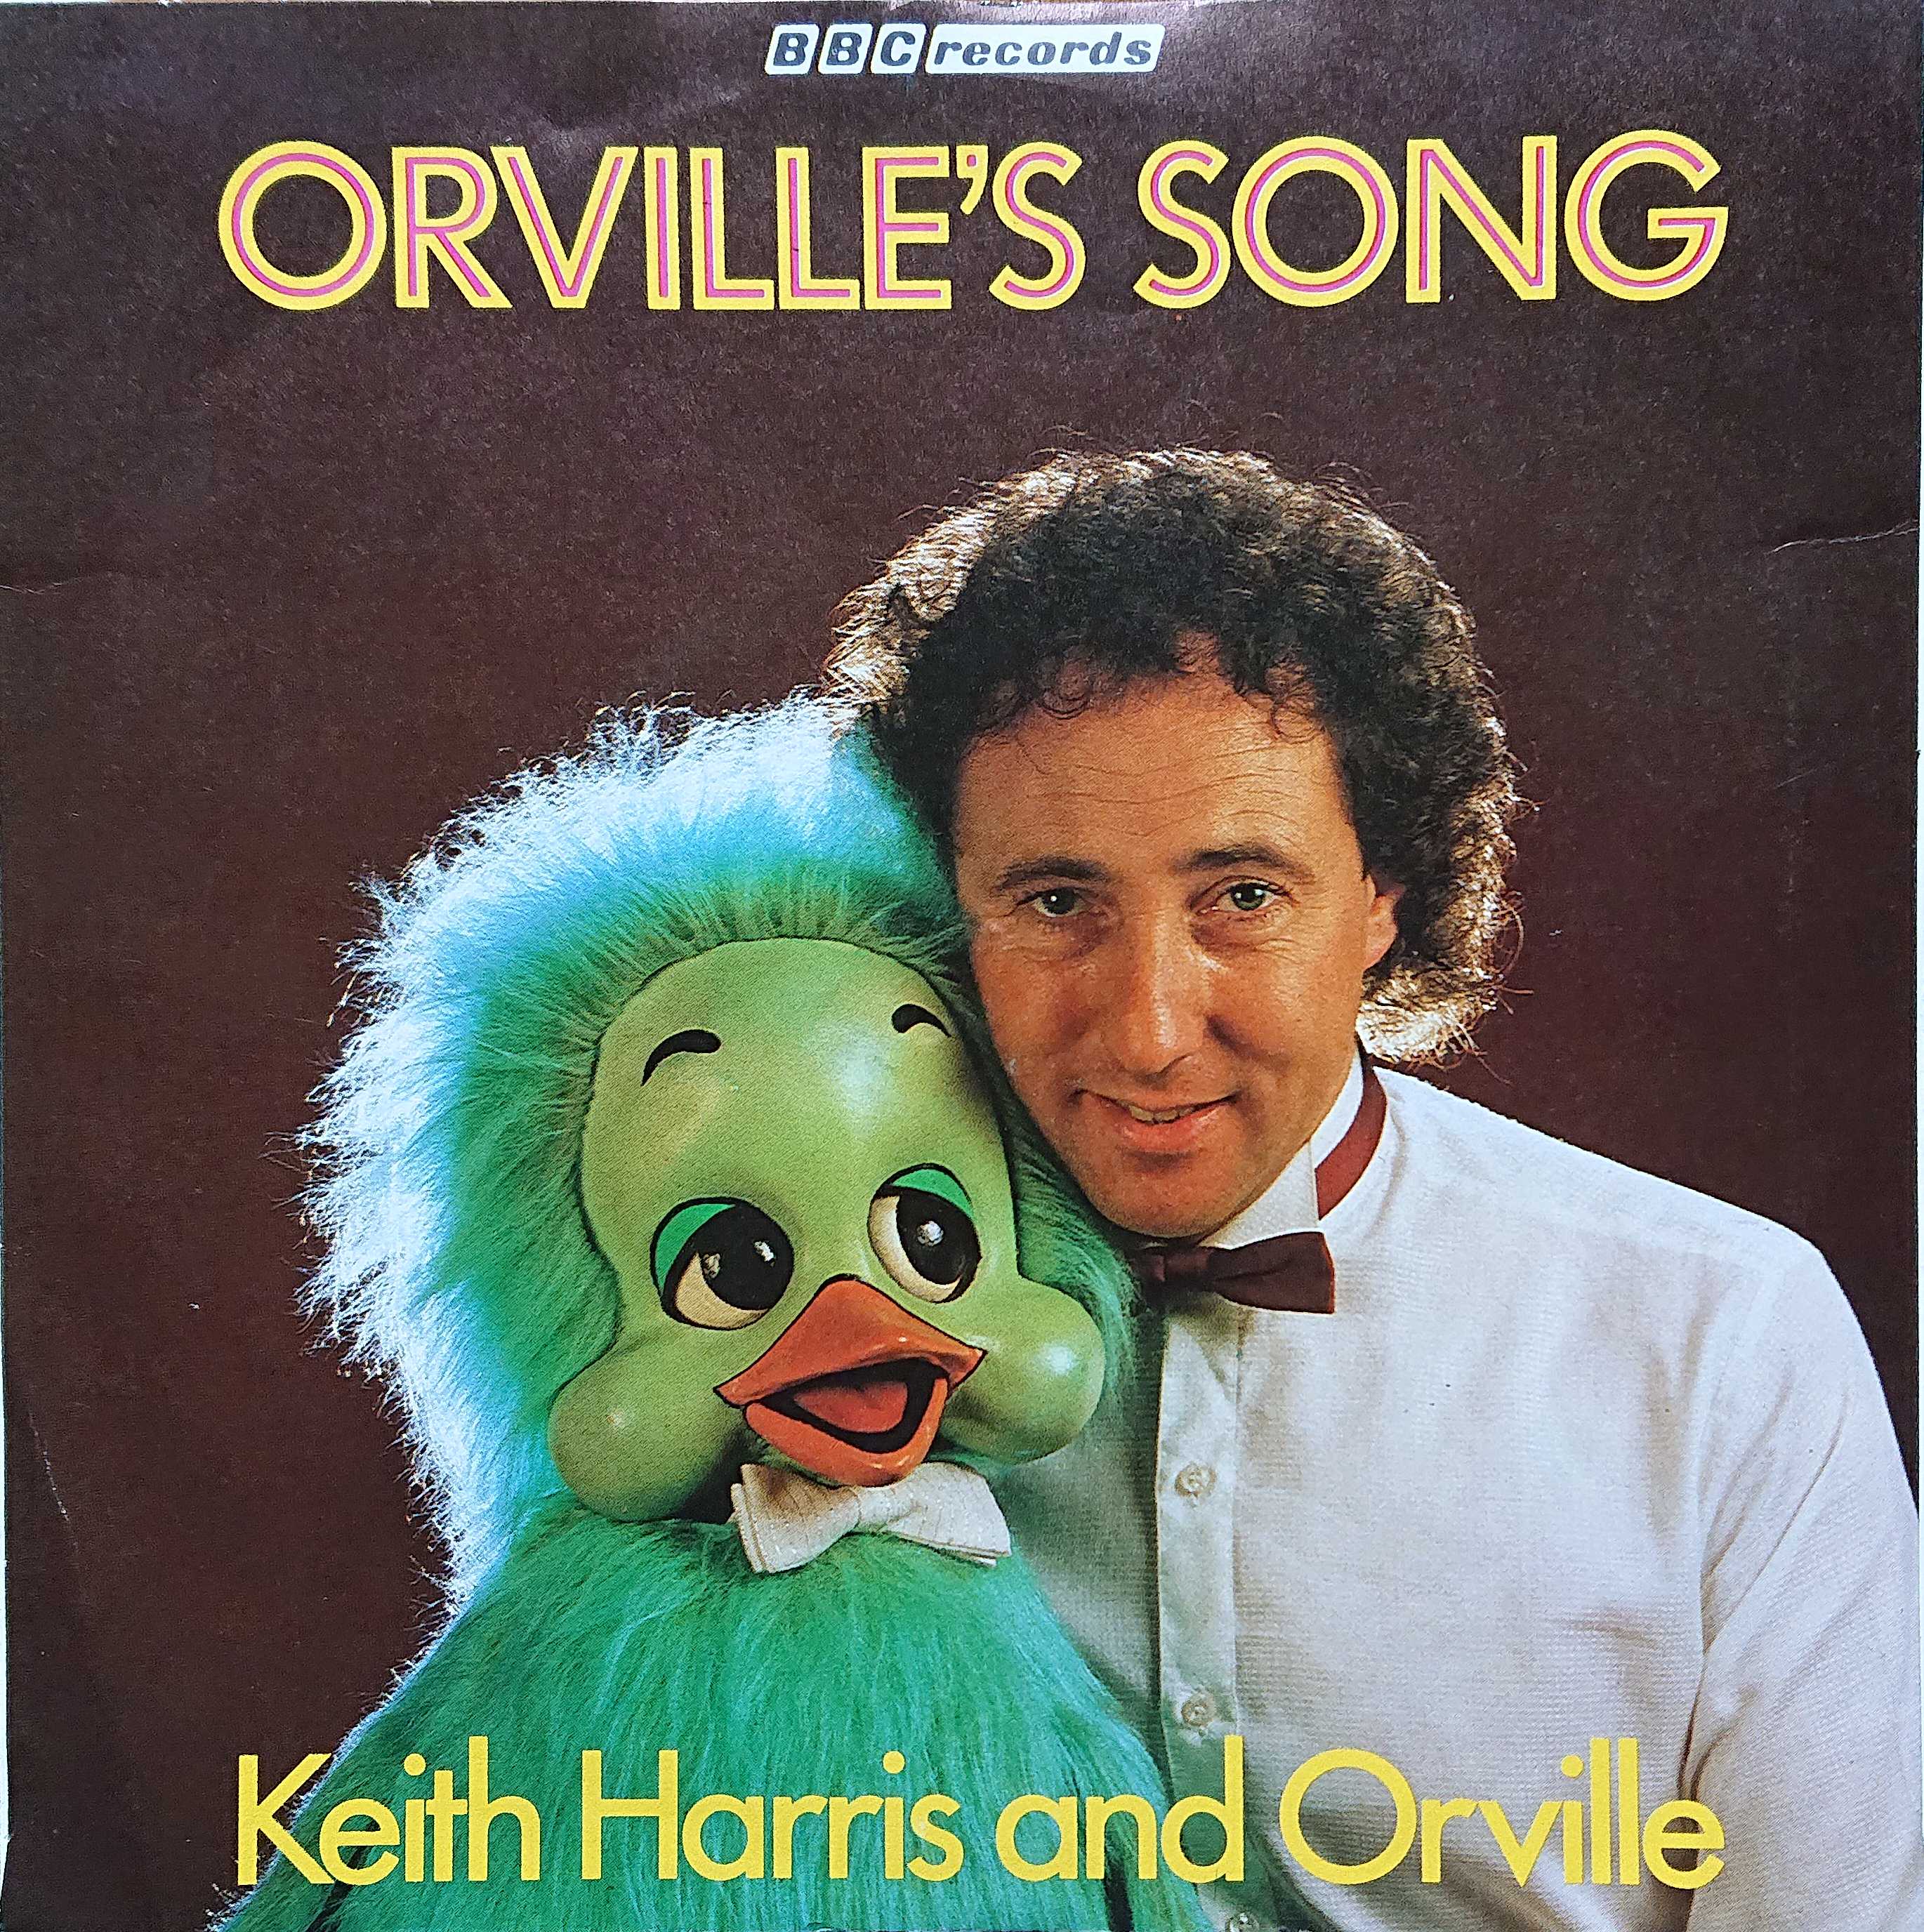 Picture of RESL 124-iD Orville's song (Dutch import) by artist Keith Harris and Orville from the BBC singles - Records and Tapes library